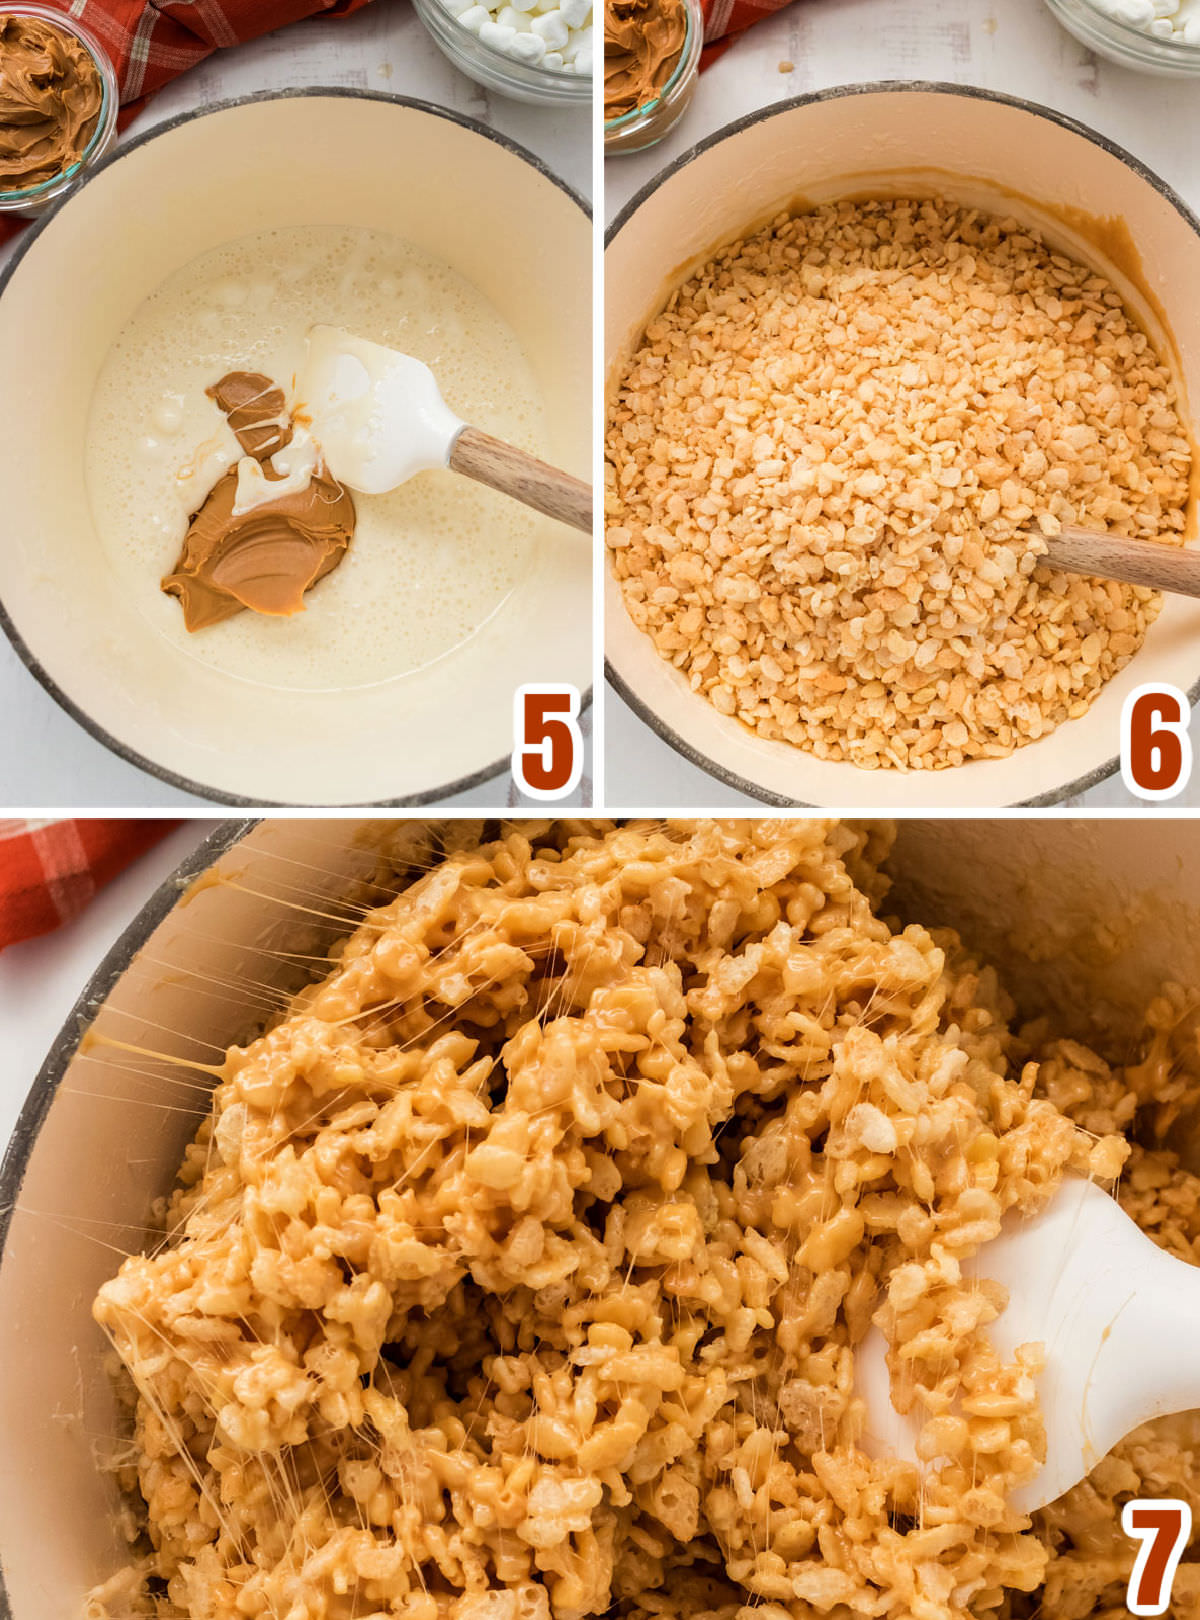 Collage image showing how to add the Peanut Butter and the Rice Krispie Cereal to the mixture.